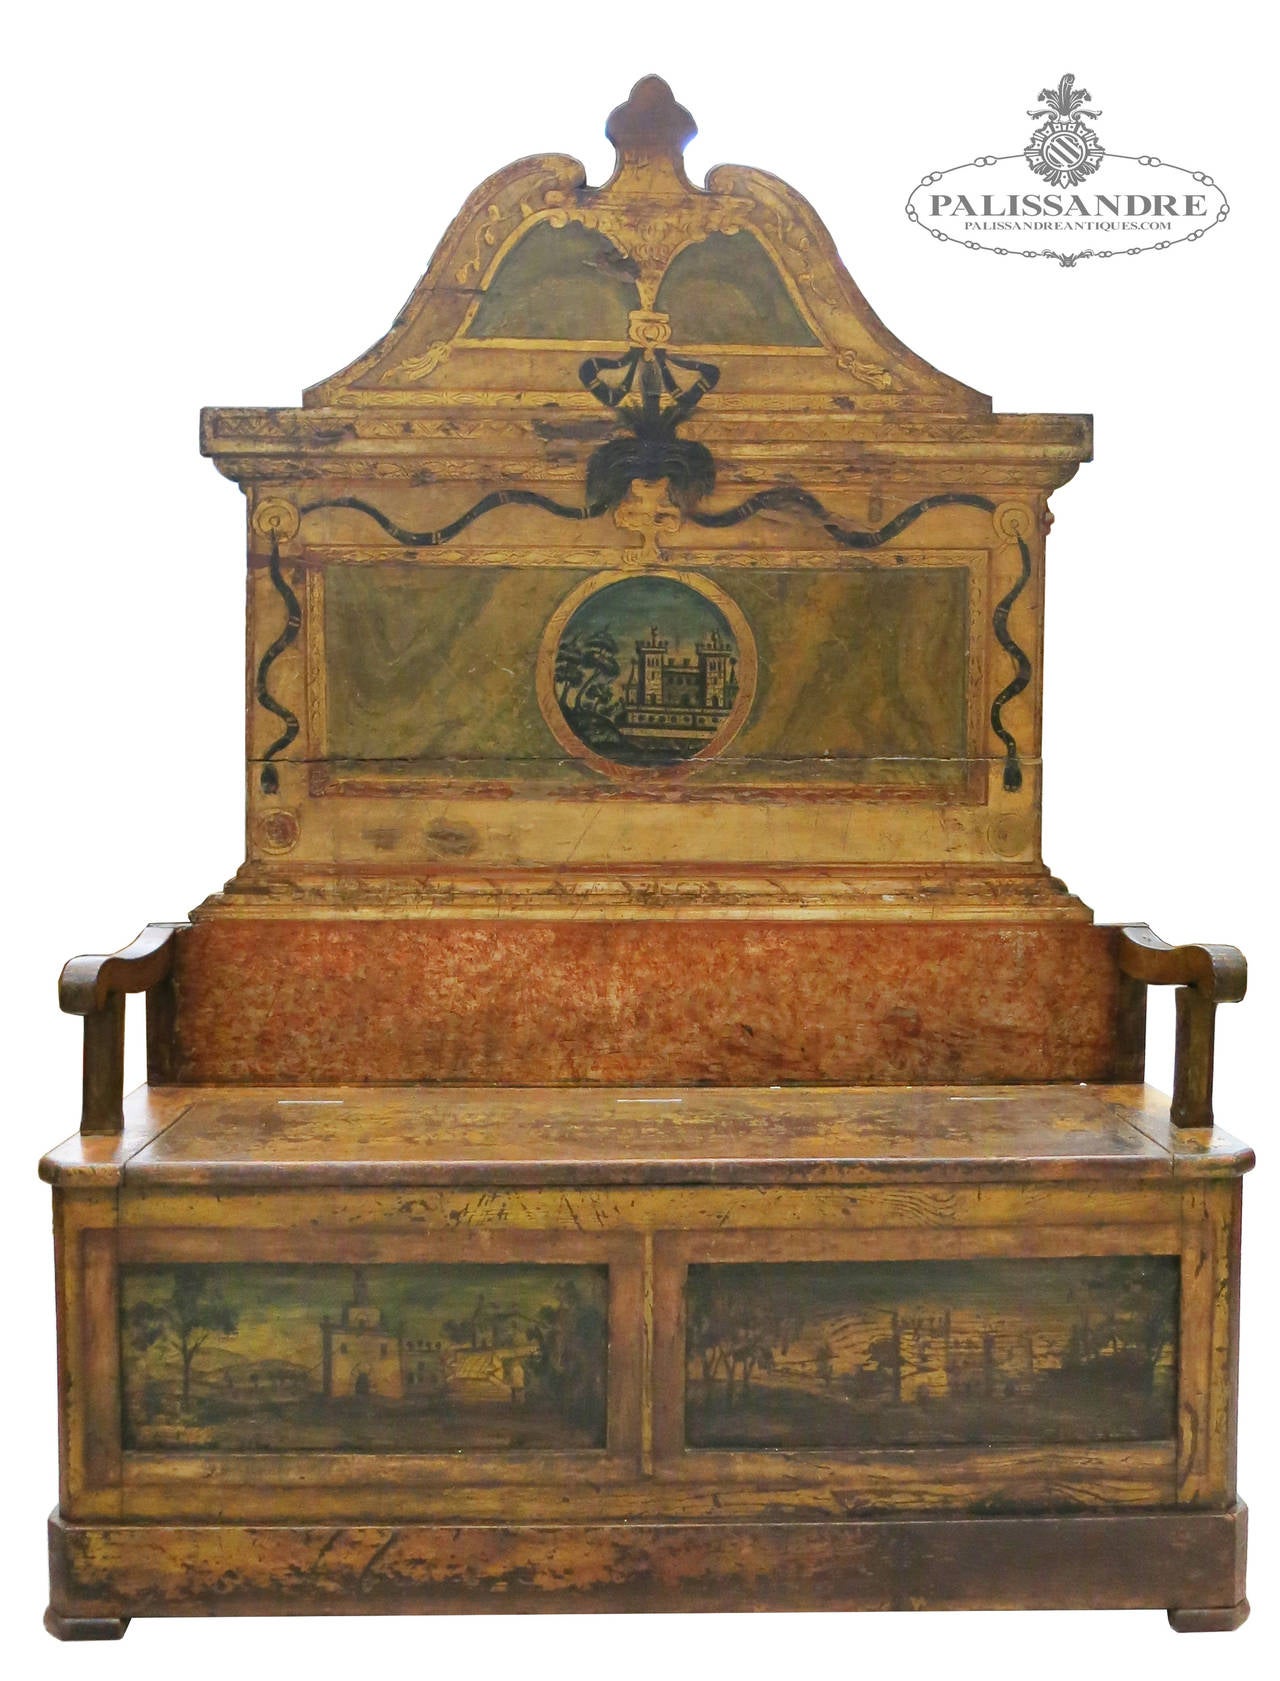 It is a rare and exquisite piece in the world of art and antiques. Good working condition.
Bank of polychrome wood. The seat, folding, with function ark. In the front are two scenes framed landscapes: a city surrounded by nature and a defensive